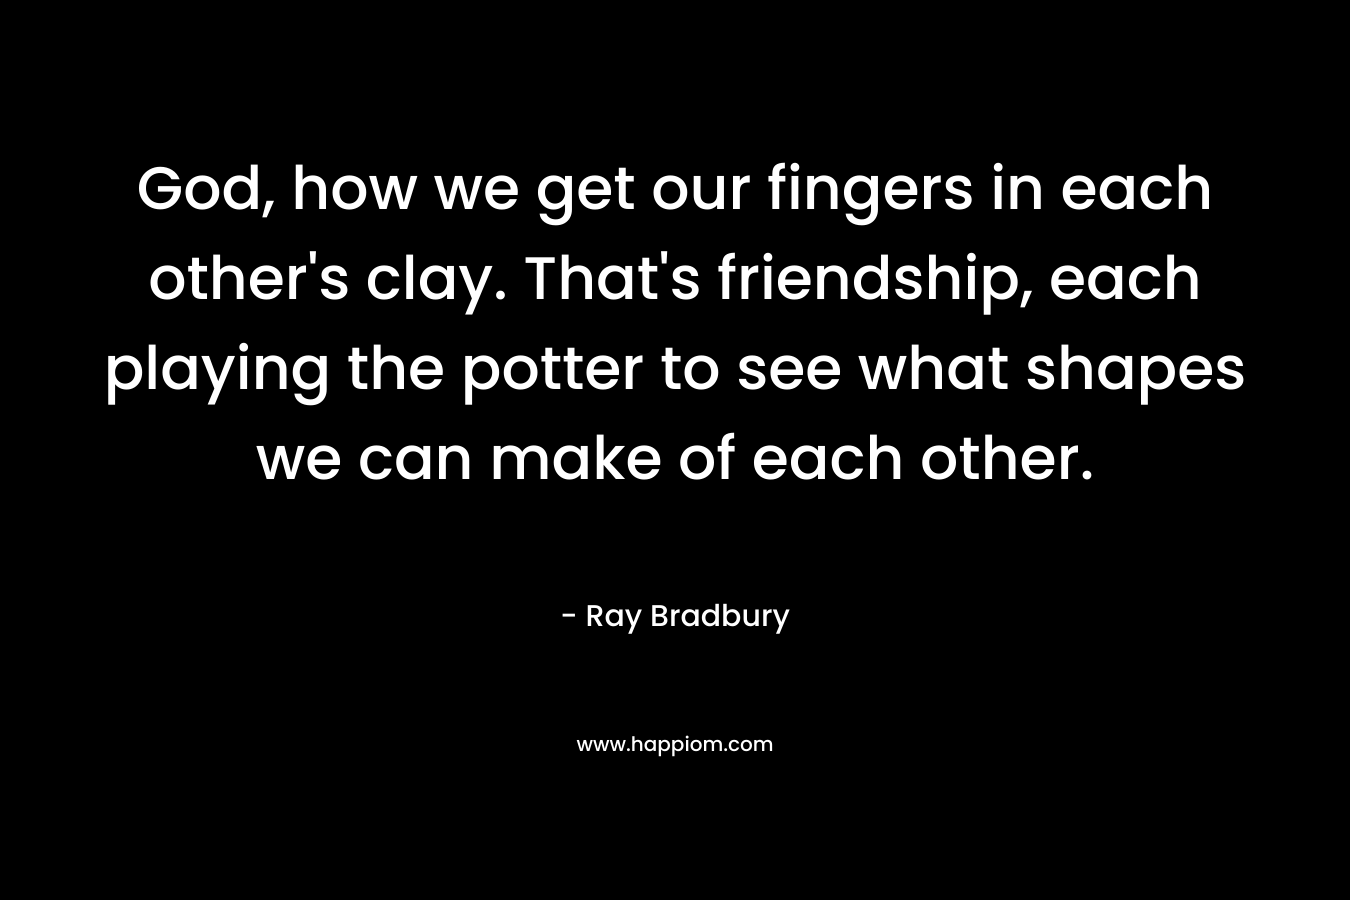 God, how we get our fingers in each other’s clay. That’s friendship, each playing the potter to see what shapes we can make of each other. – Ray Bradbury